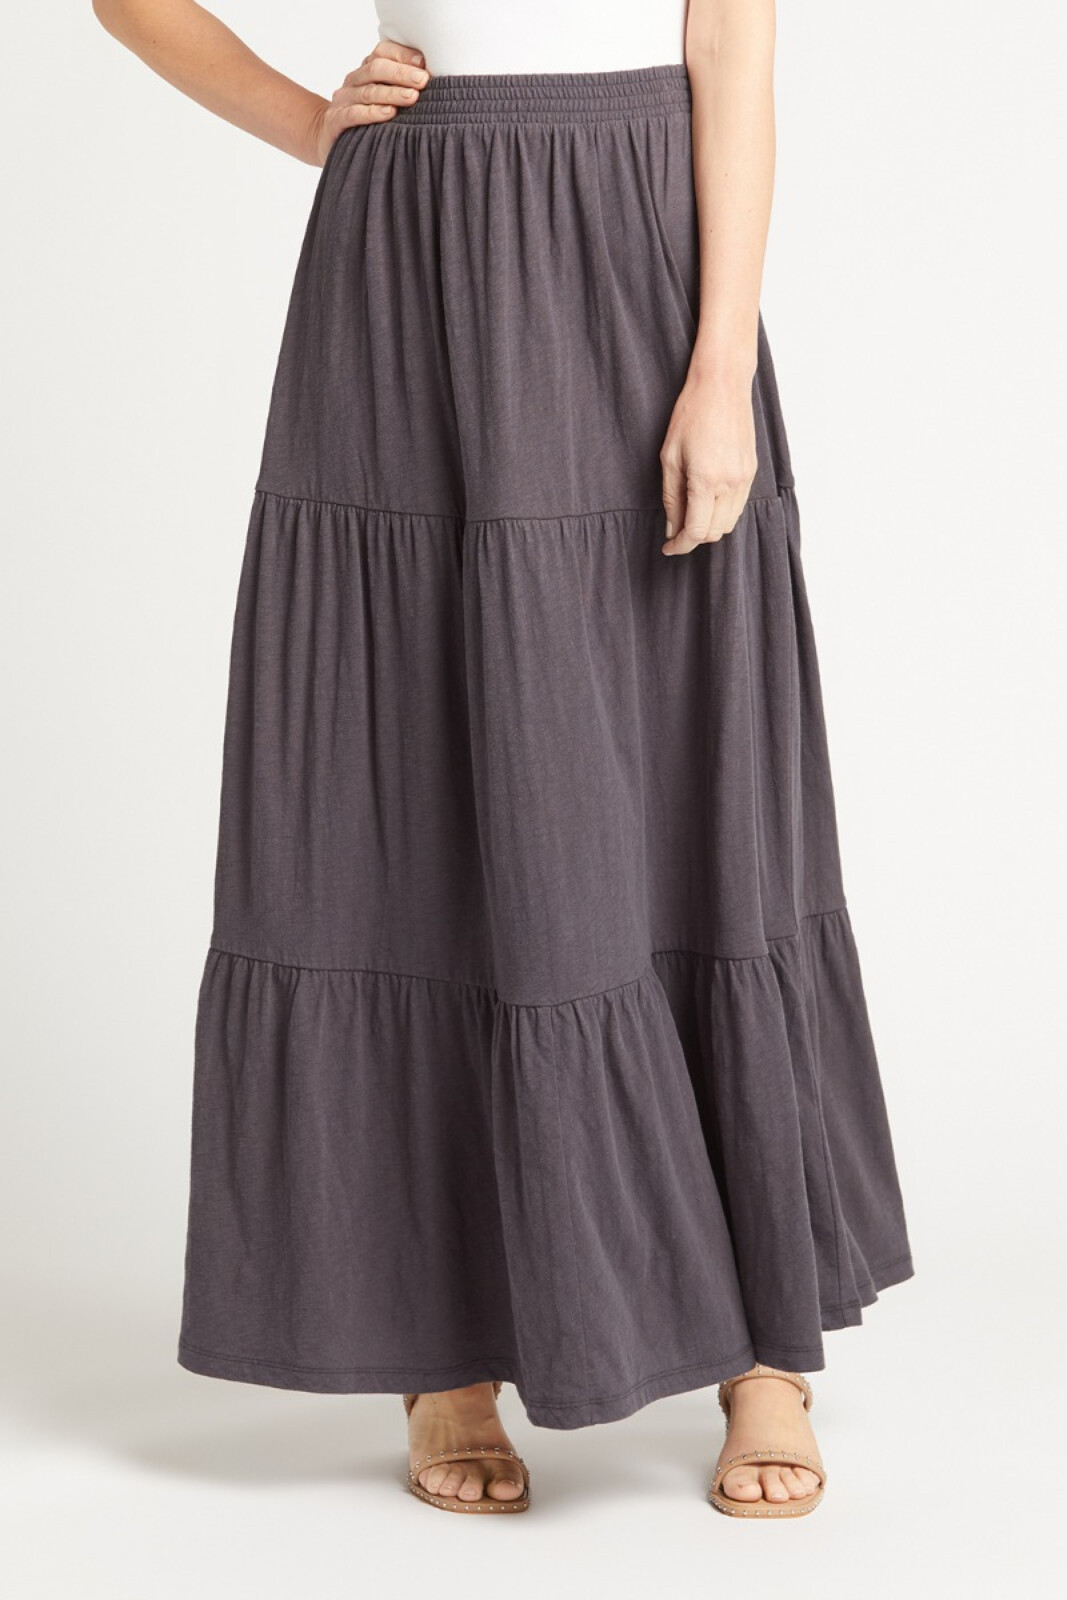 Z SUPPLY Tiered Maxi Skirt | EVEREVE